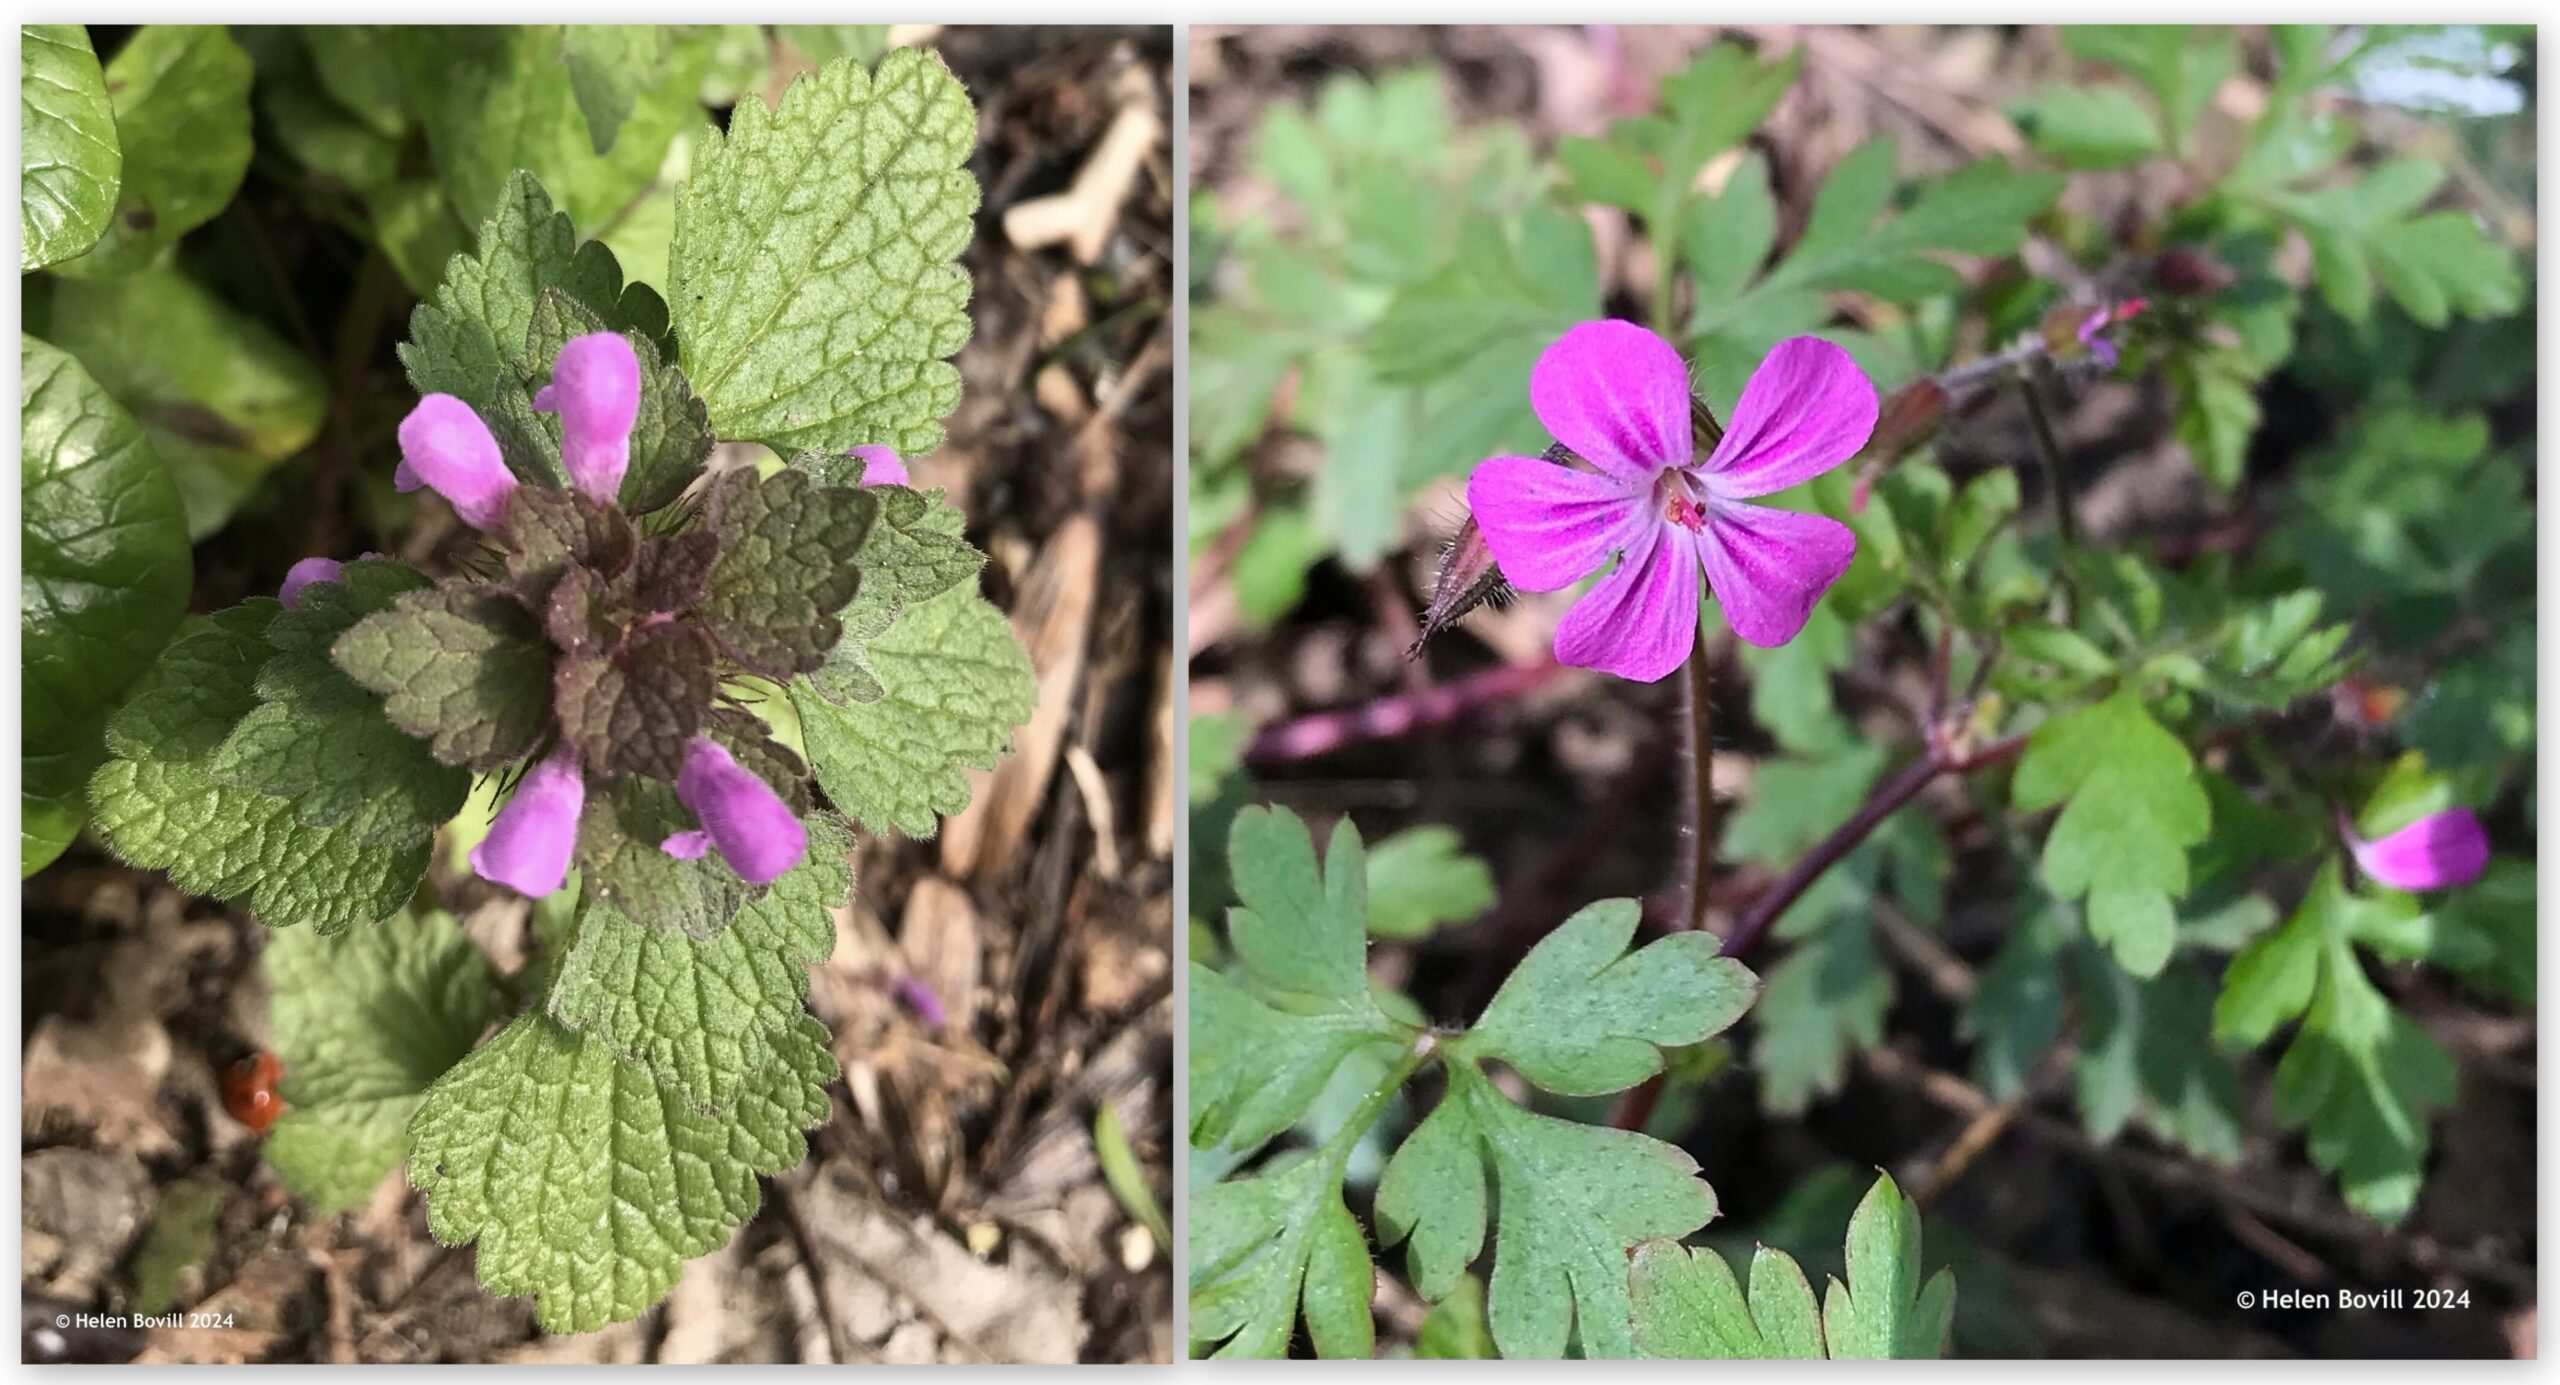 Two photos showing pink flowers - Red dead-nettle and Herb Robert.